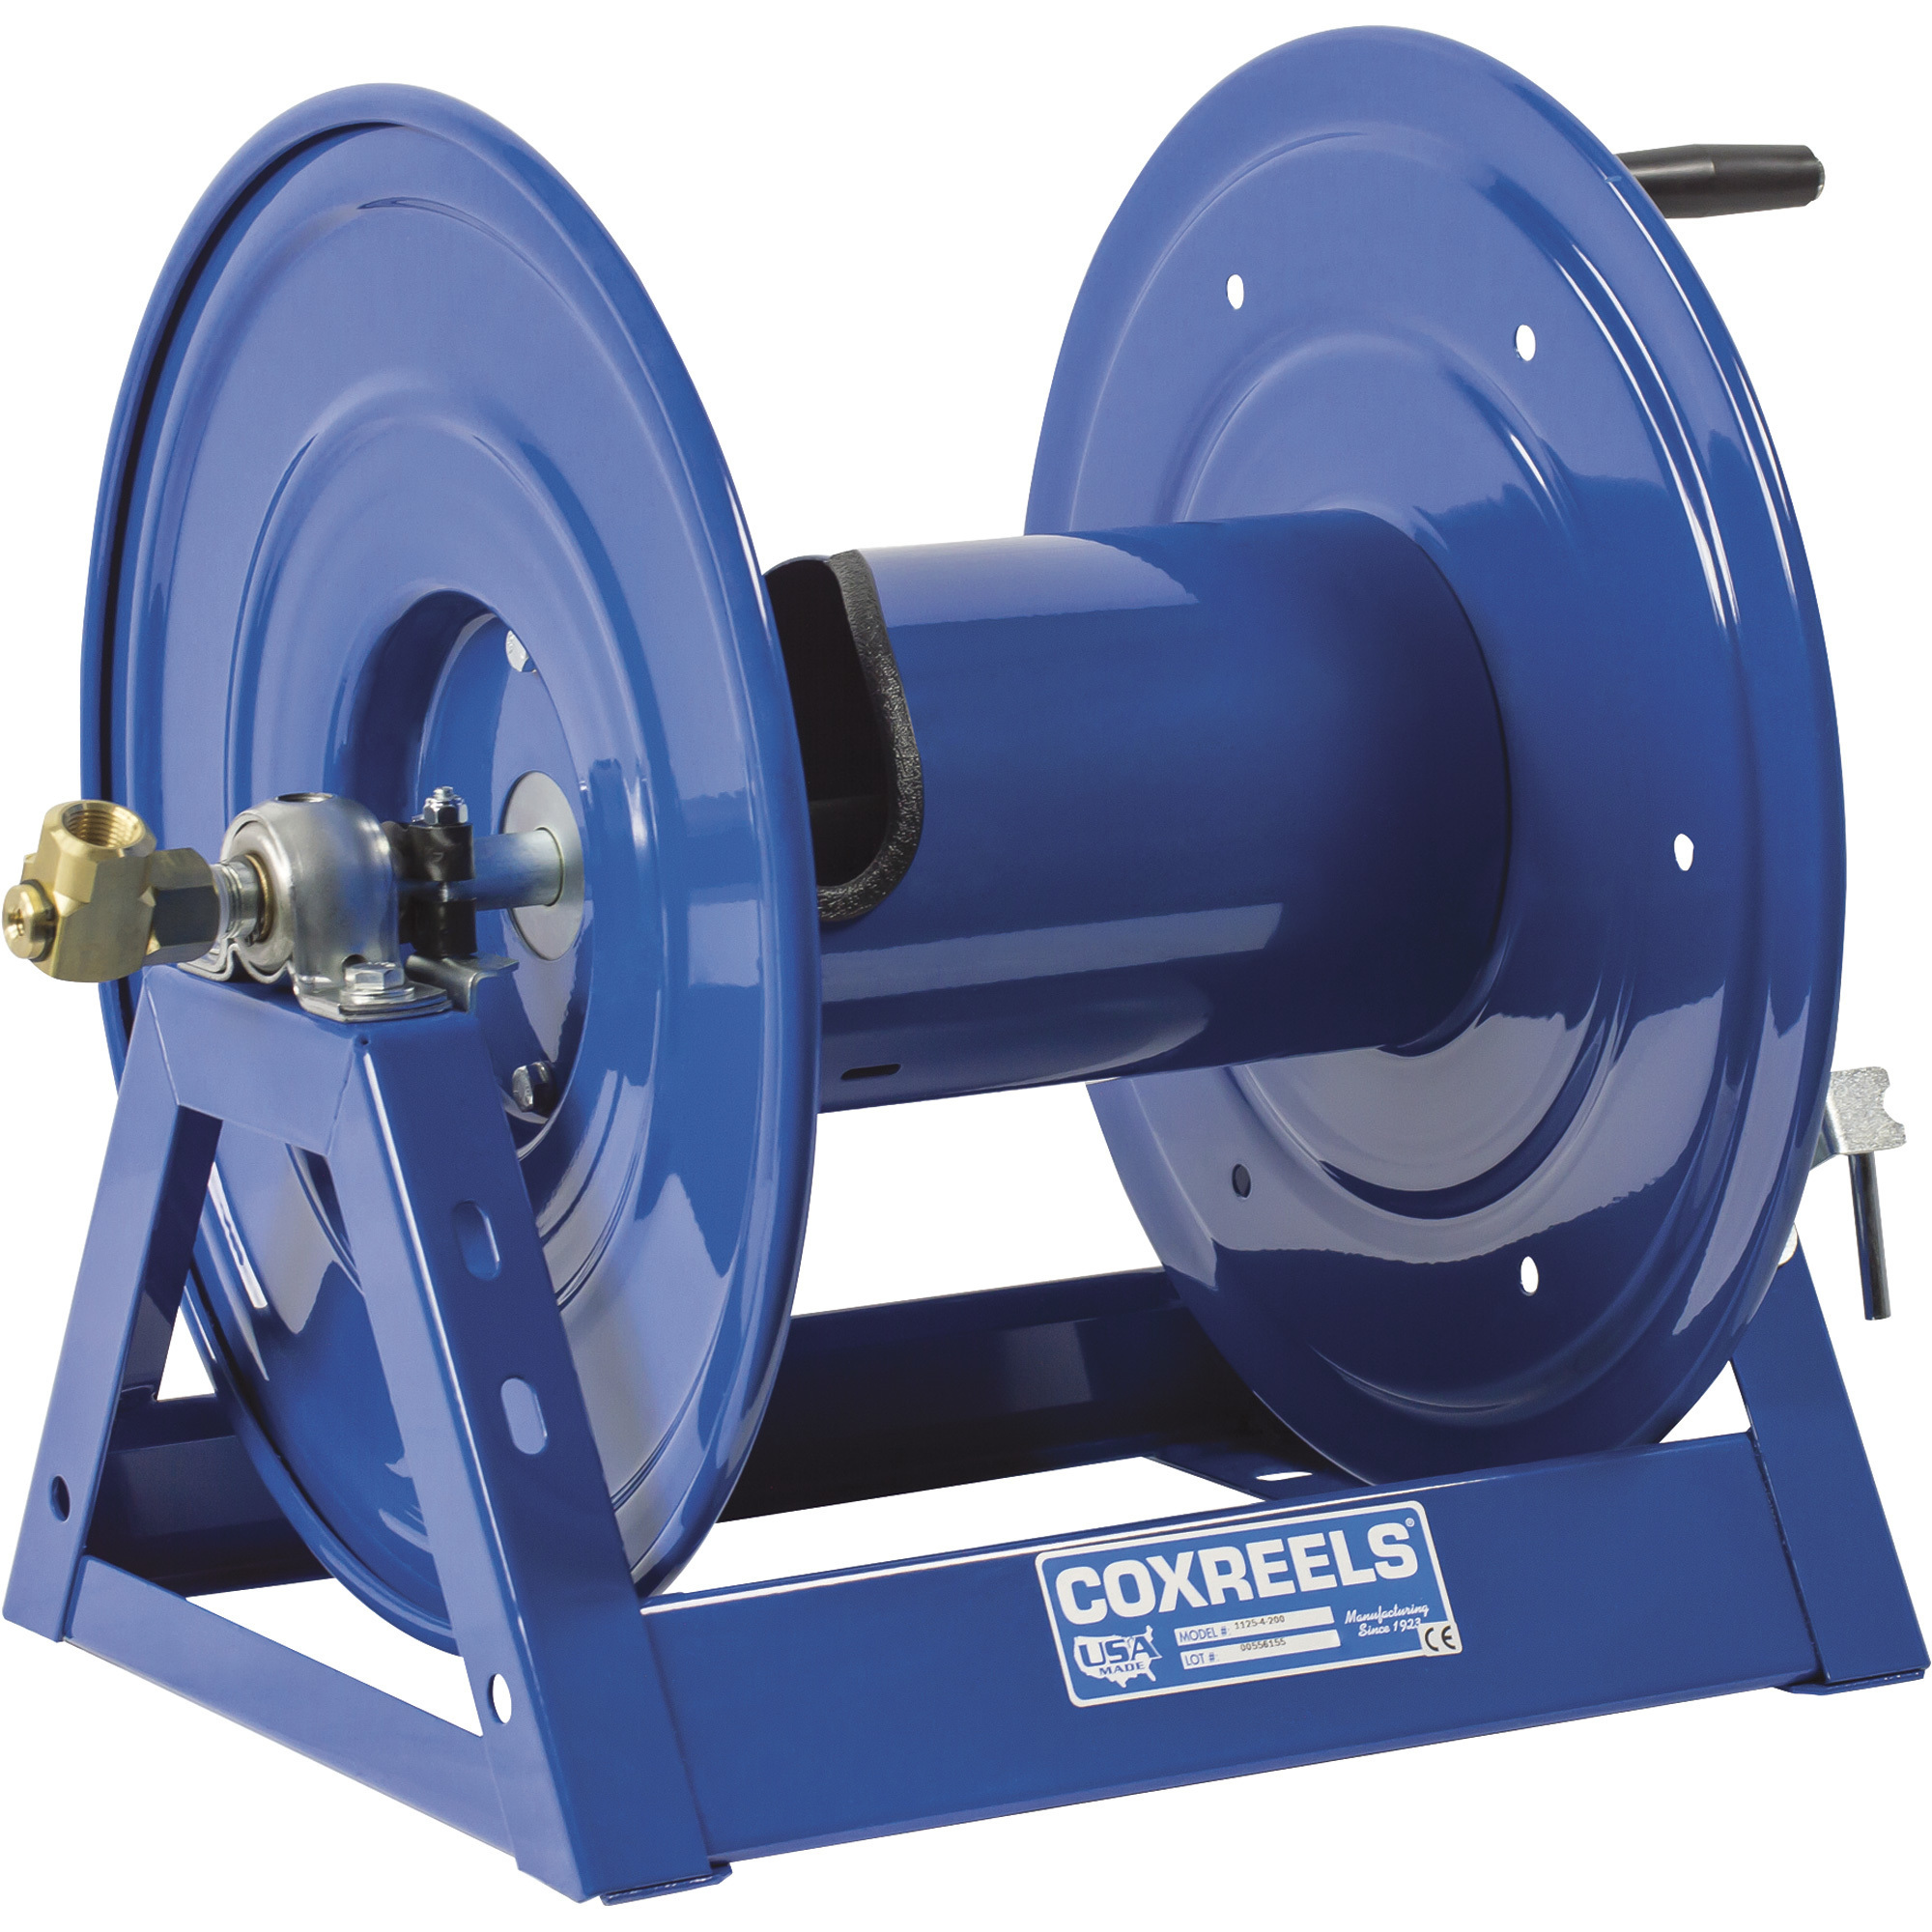 Coxreels 1125 Series Hand-Crank Hose Reel, Holds 3/4Inch x 175ft. Hose, Max. 3000 PSI, Model 1125-5-175